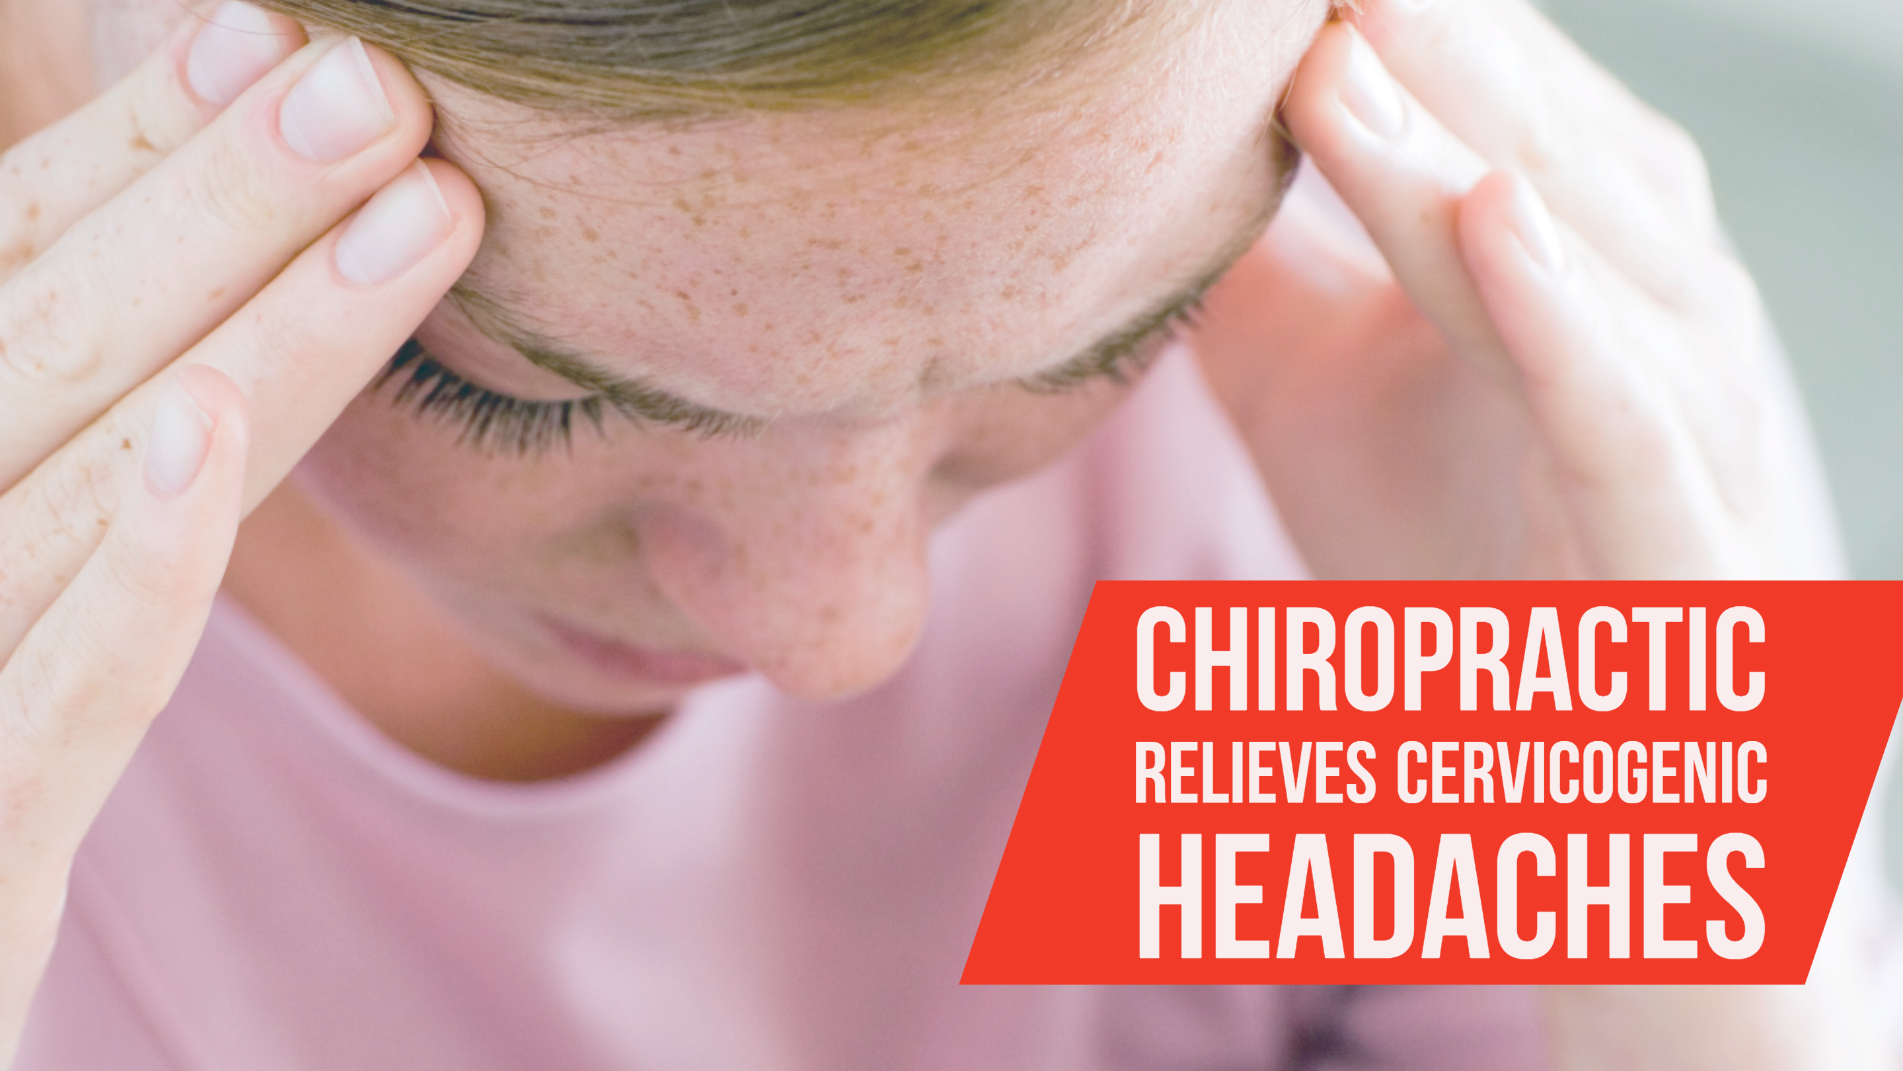 Video Chiropractic Relieves Cervicogenic Headaches Chiropractic News By Chironexus 3241